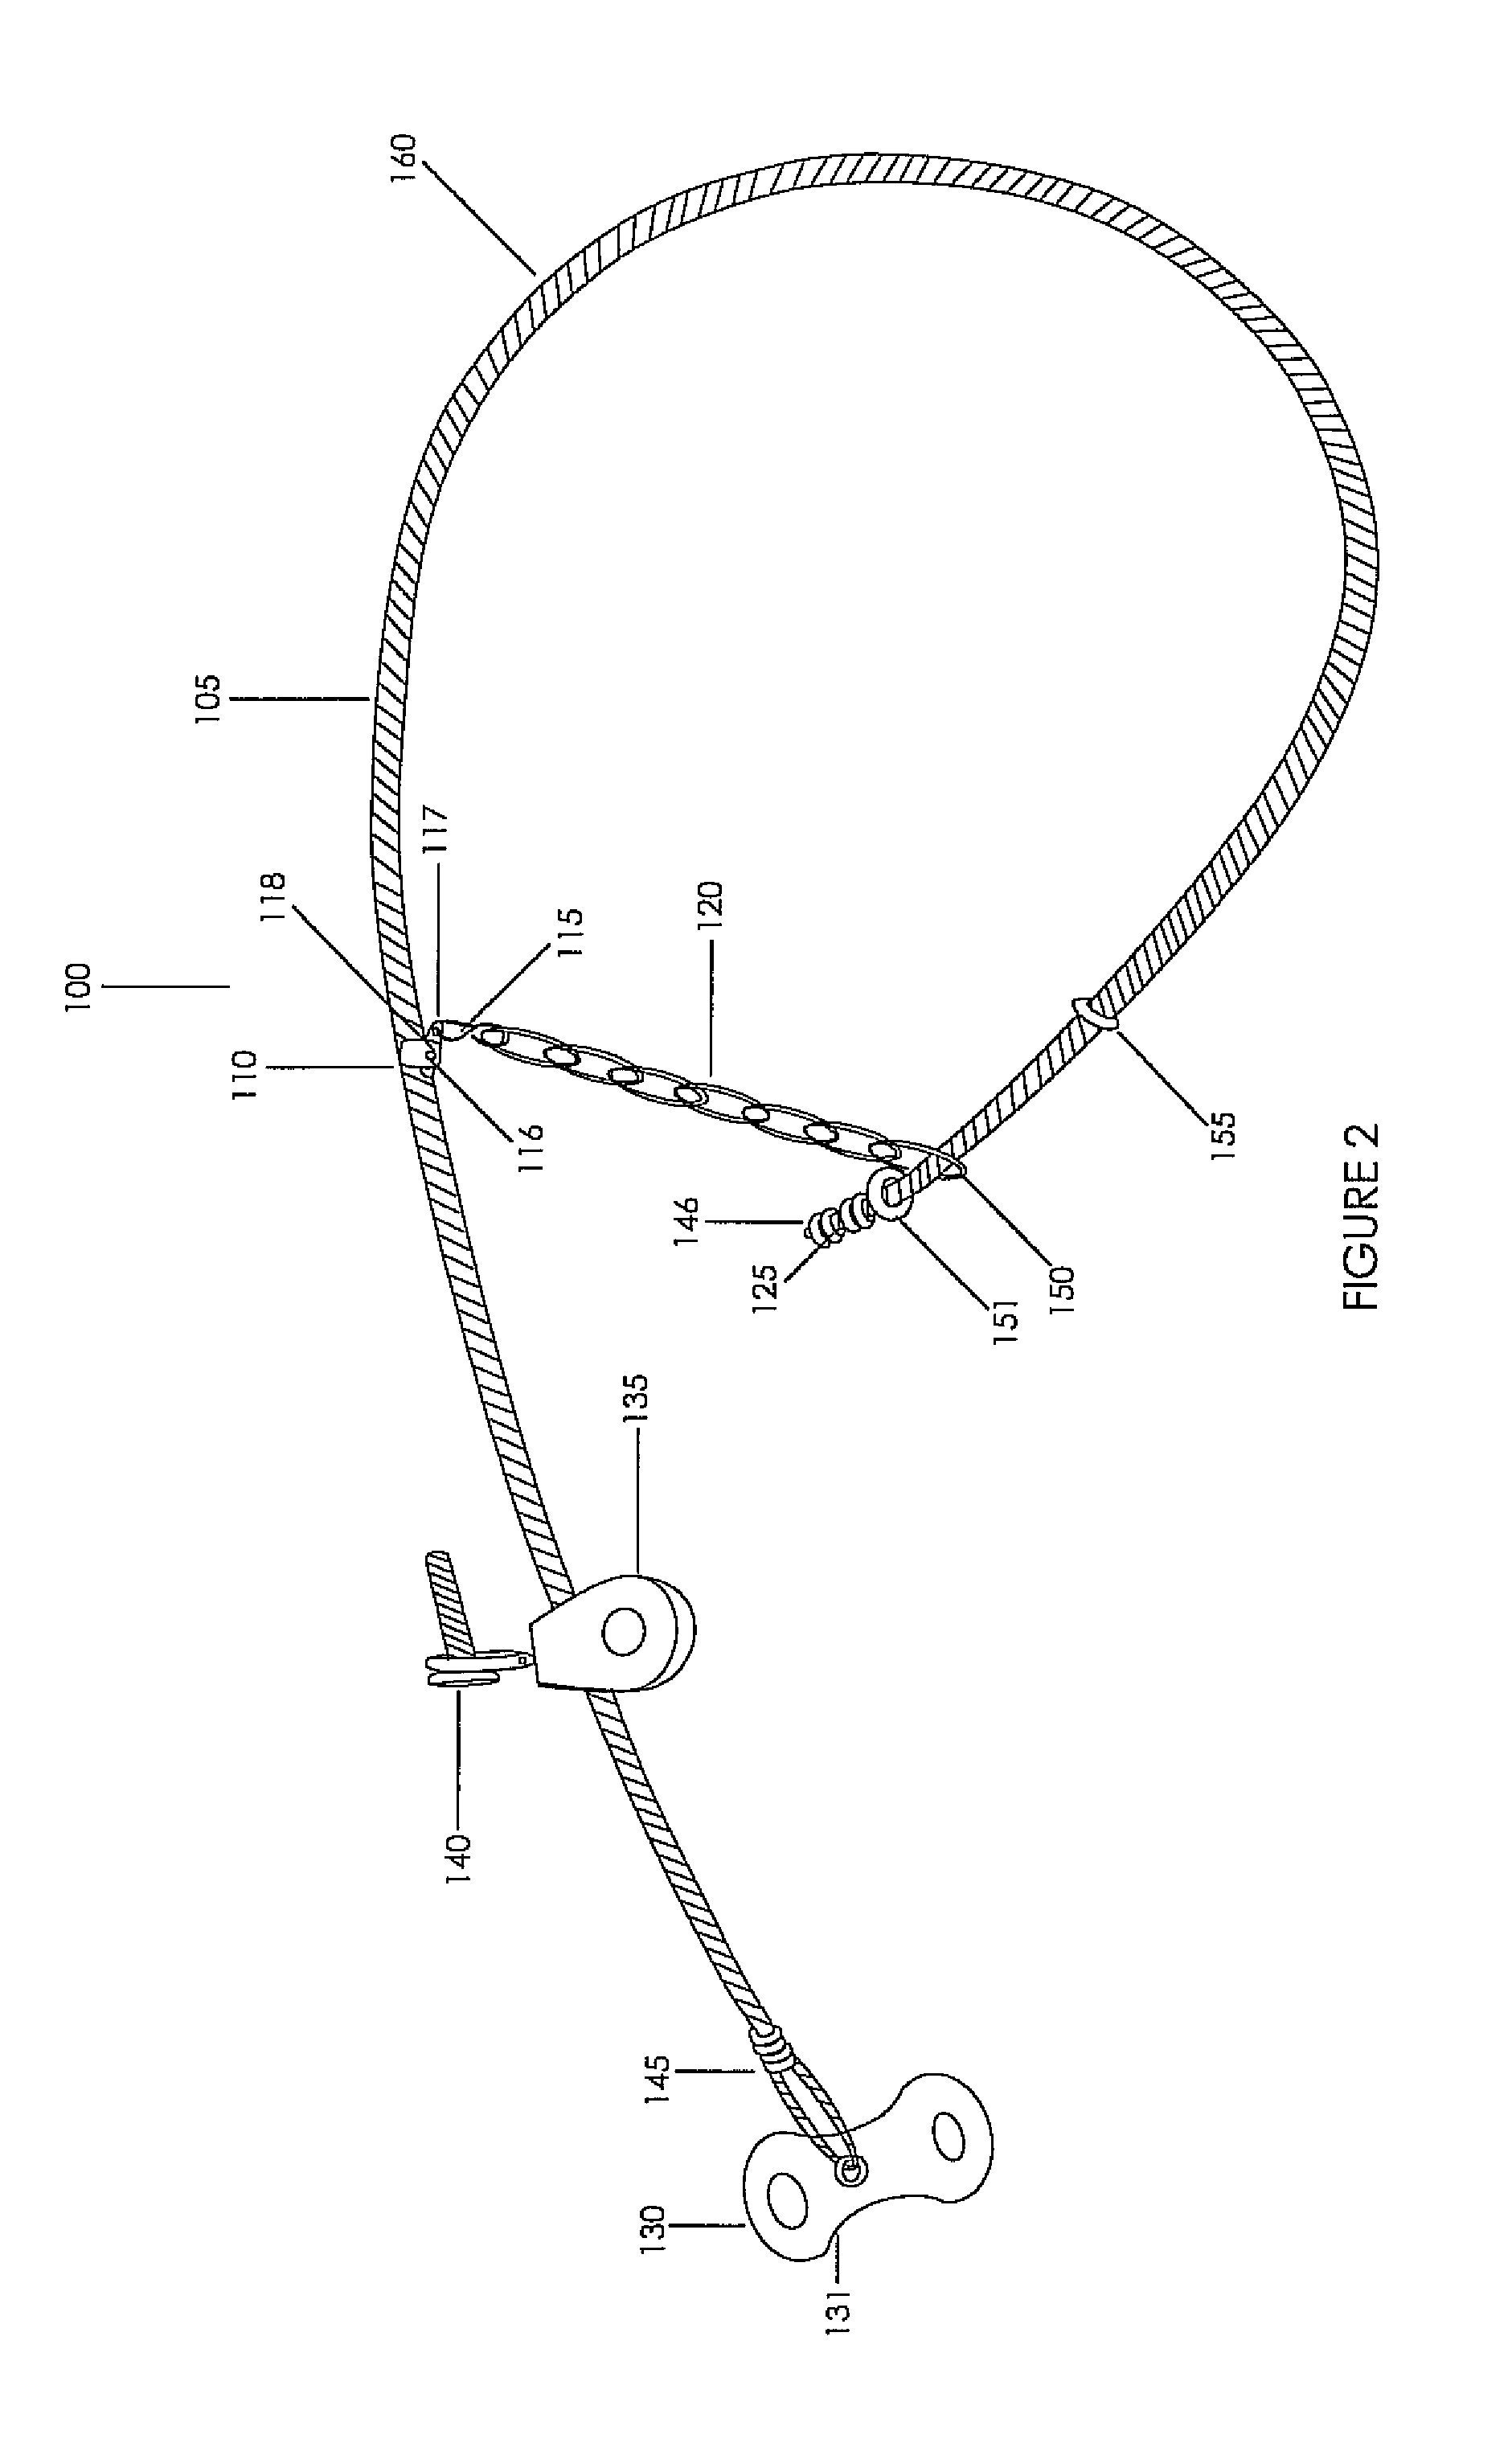 Foot snare device